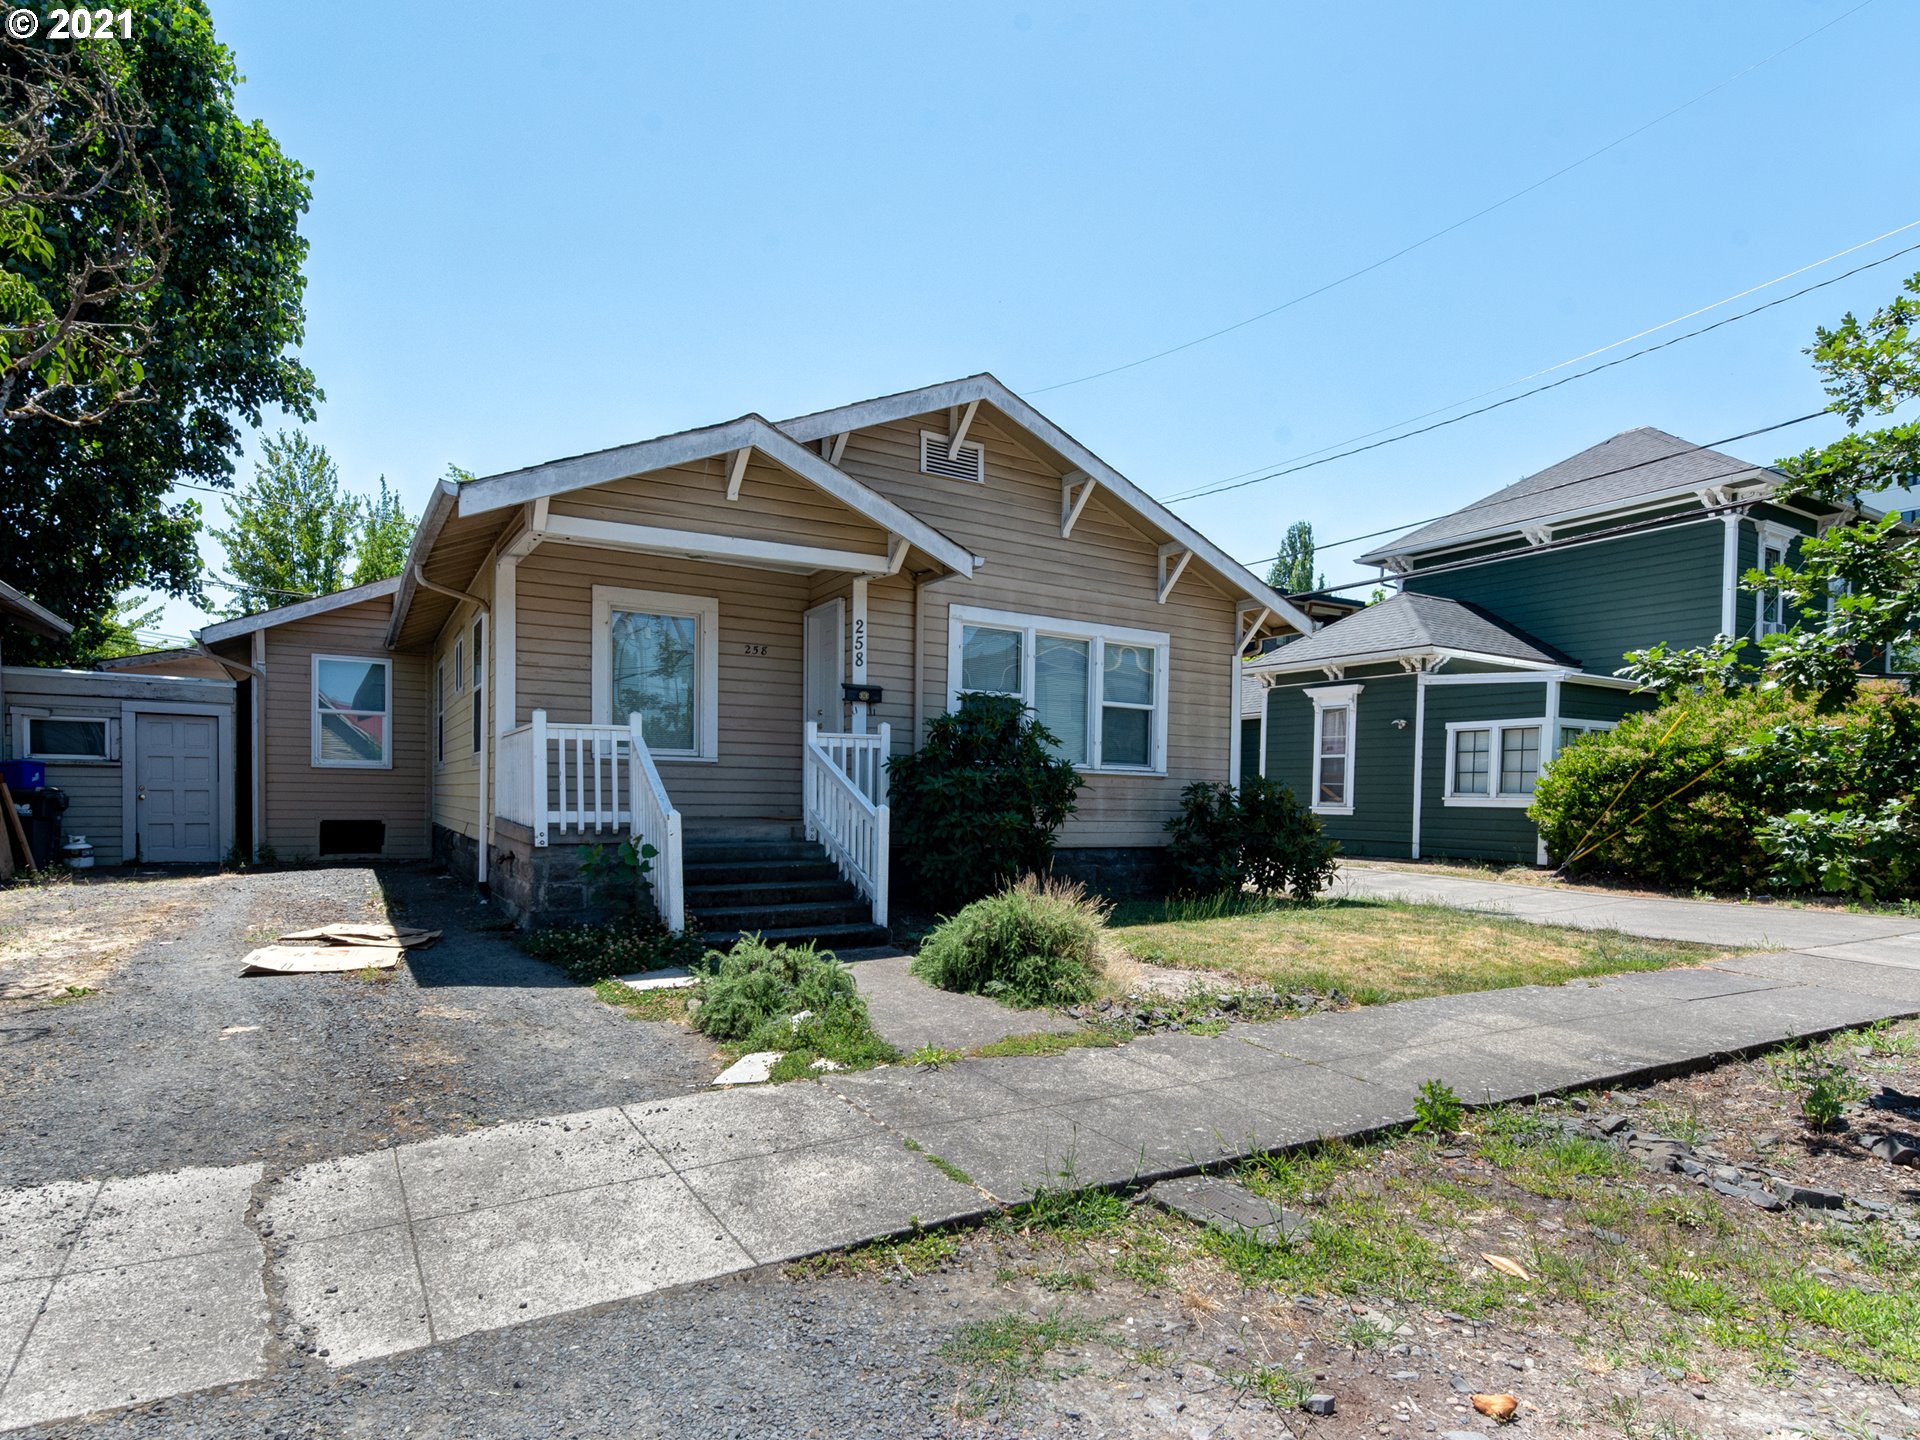 258 E 16TH AVE (1 of 19)